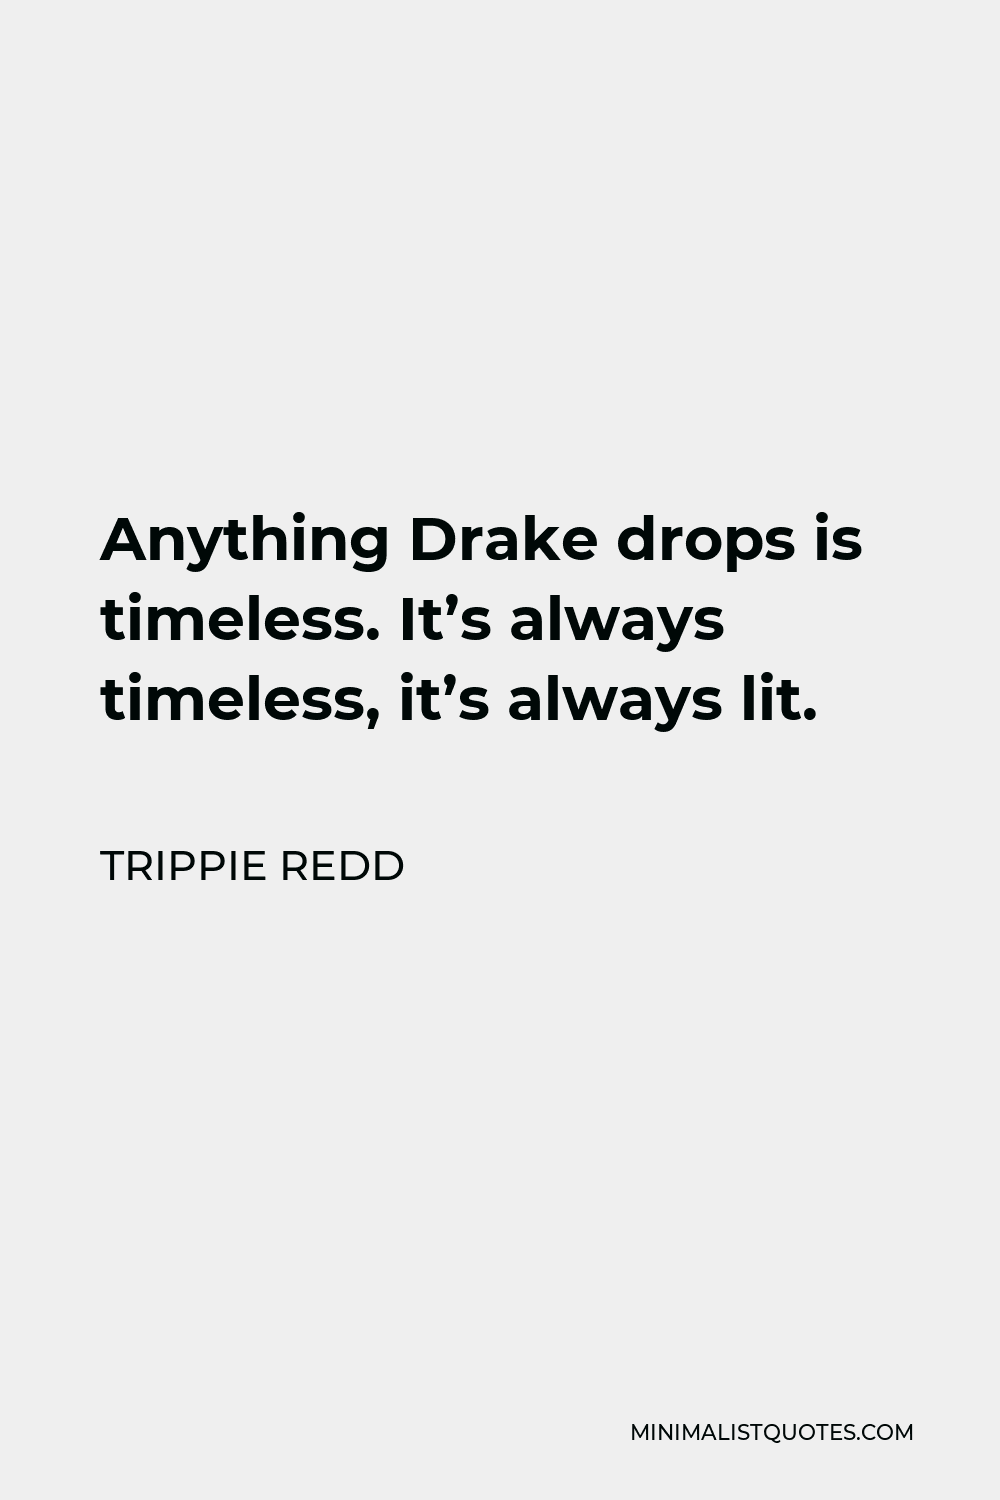 Trippie Redd Quote - Anything Drake drops is timeless. It’s always timeless, it’s always lit.